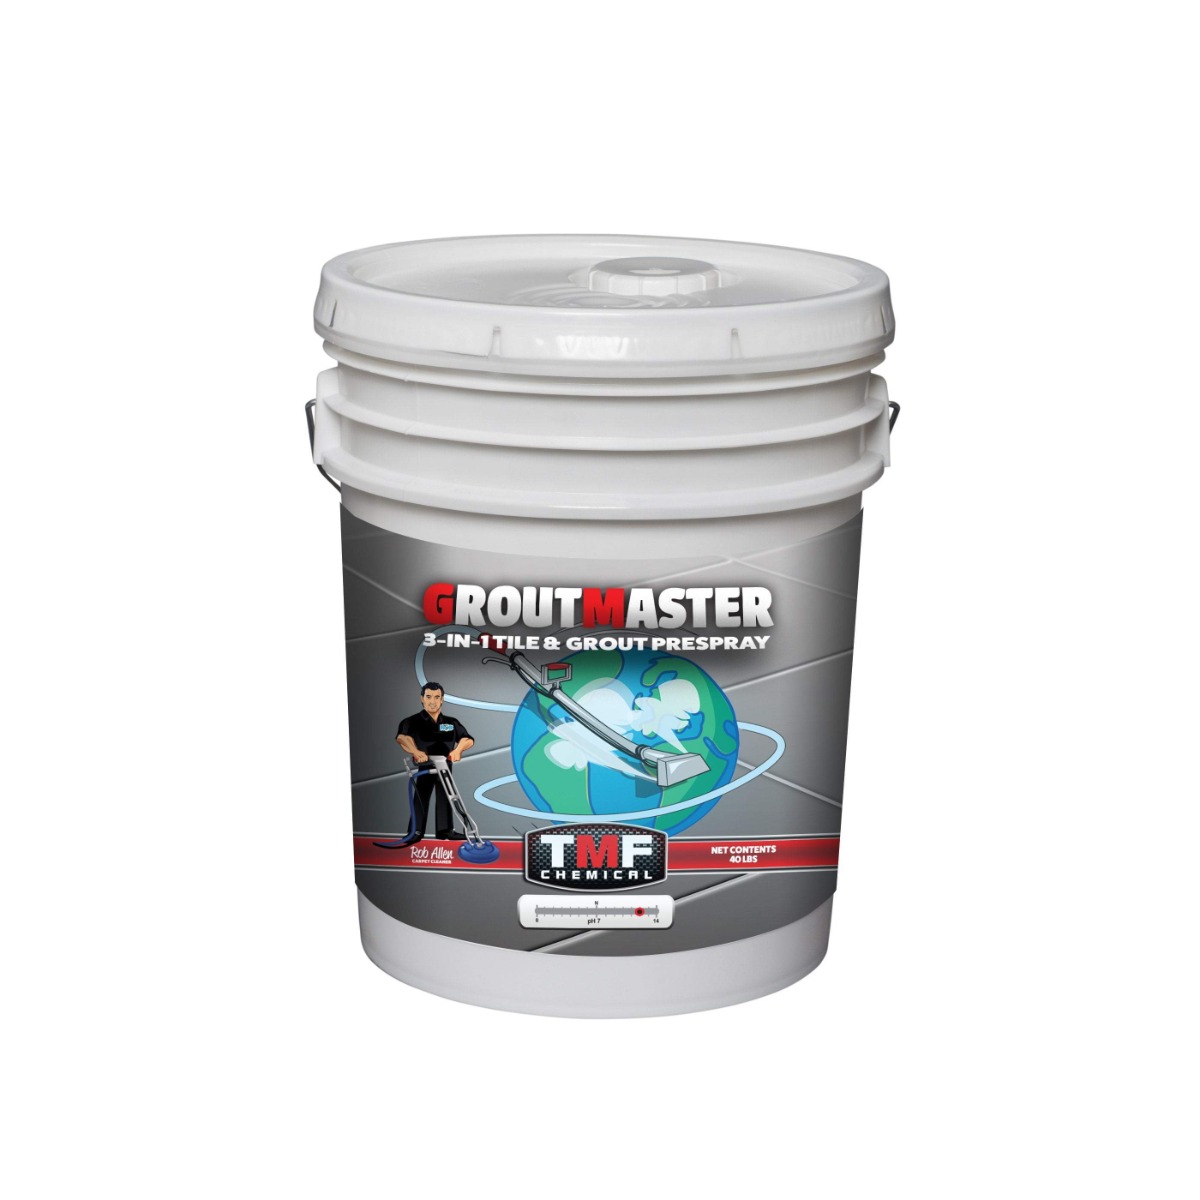 Groutmaster Pail